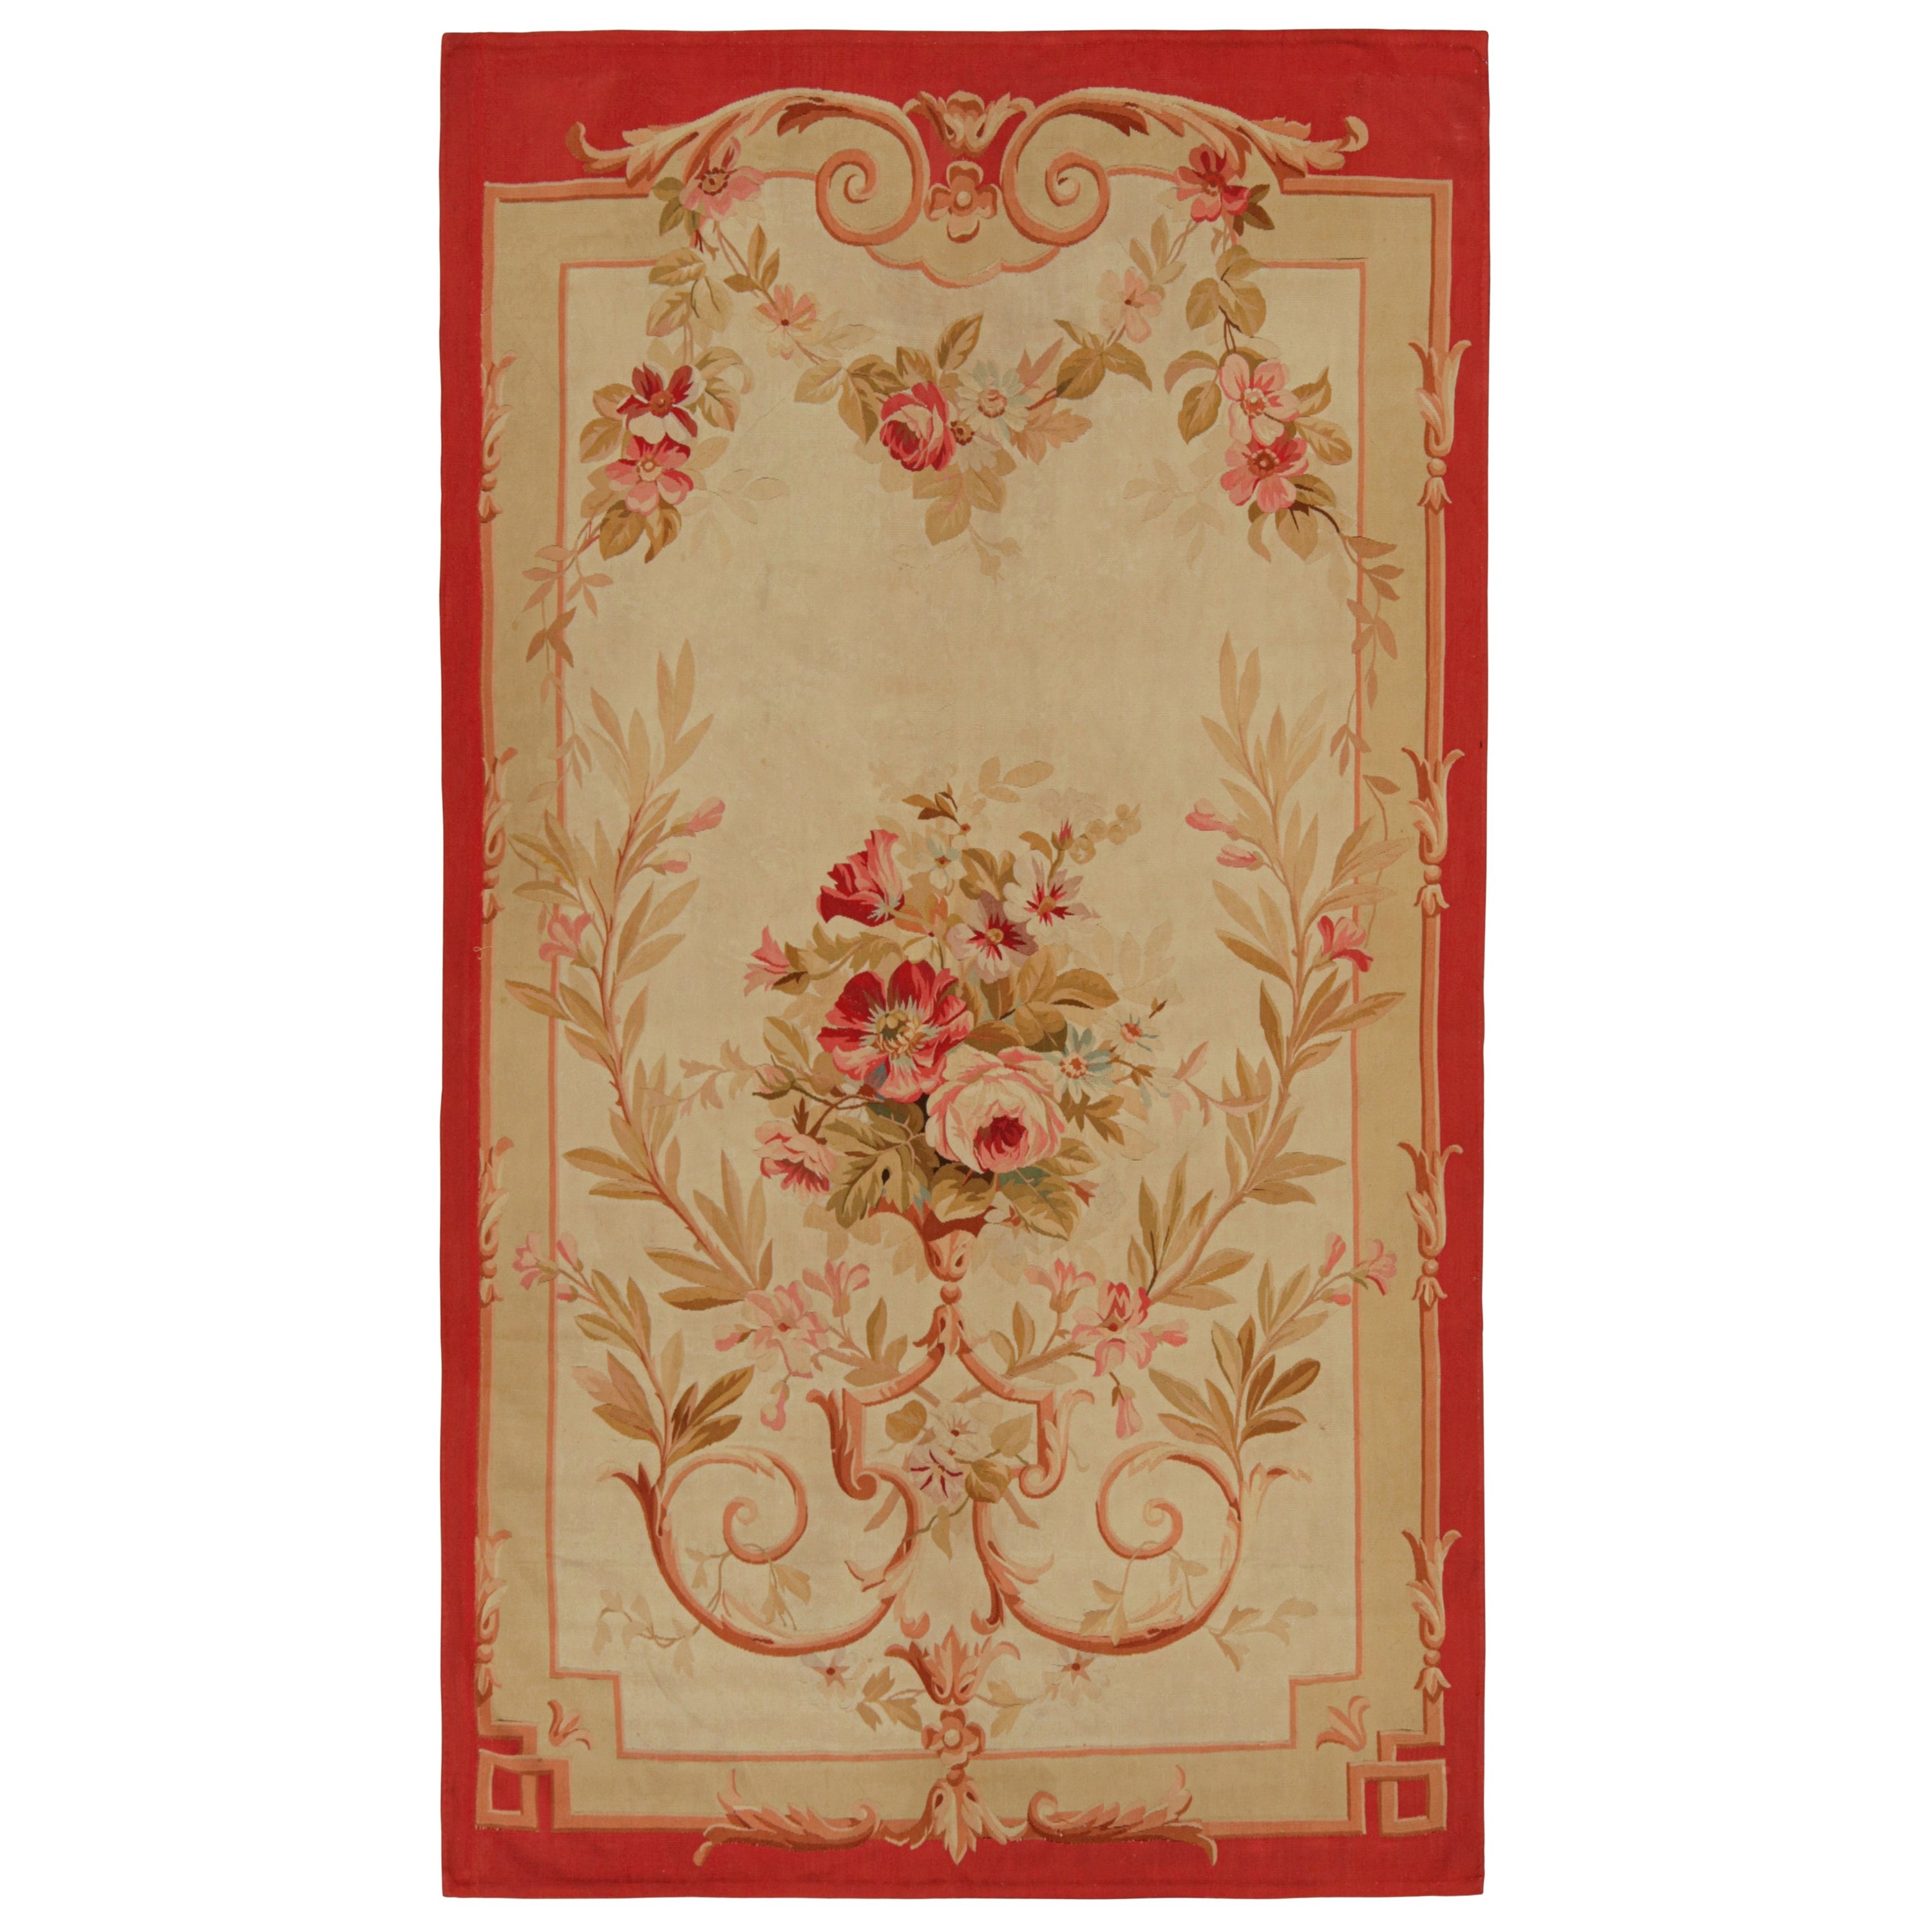 Antique Aubusson Flatweave Rug in Beige with Floral Patterns, from Rug & Kilim For Sale